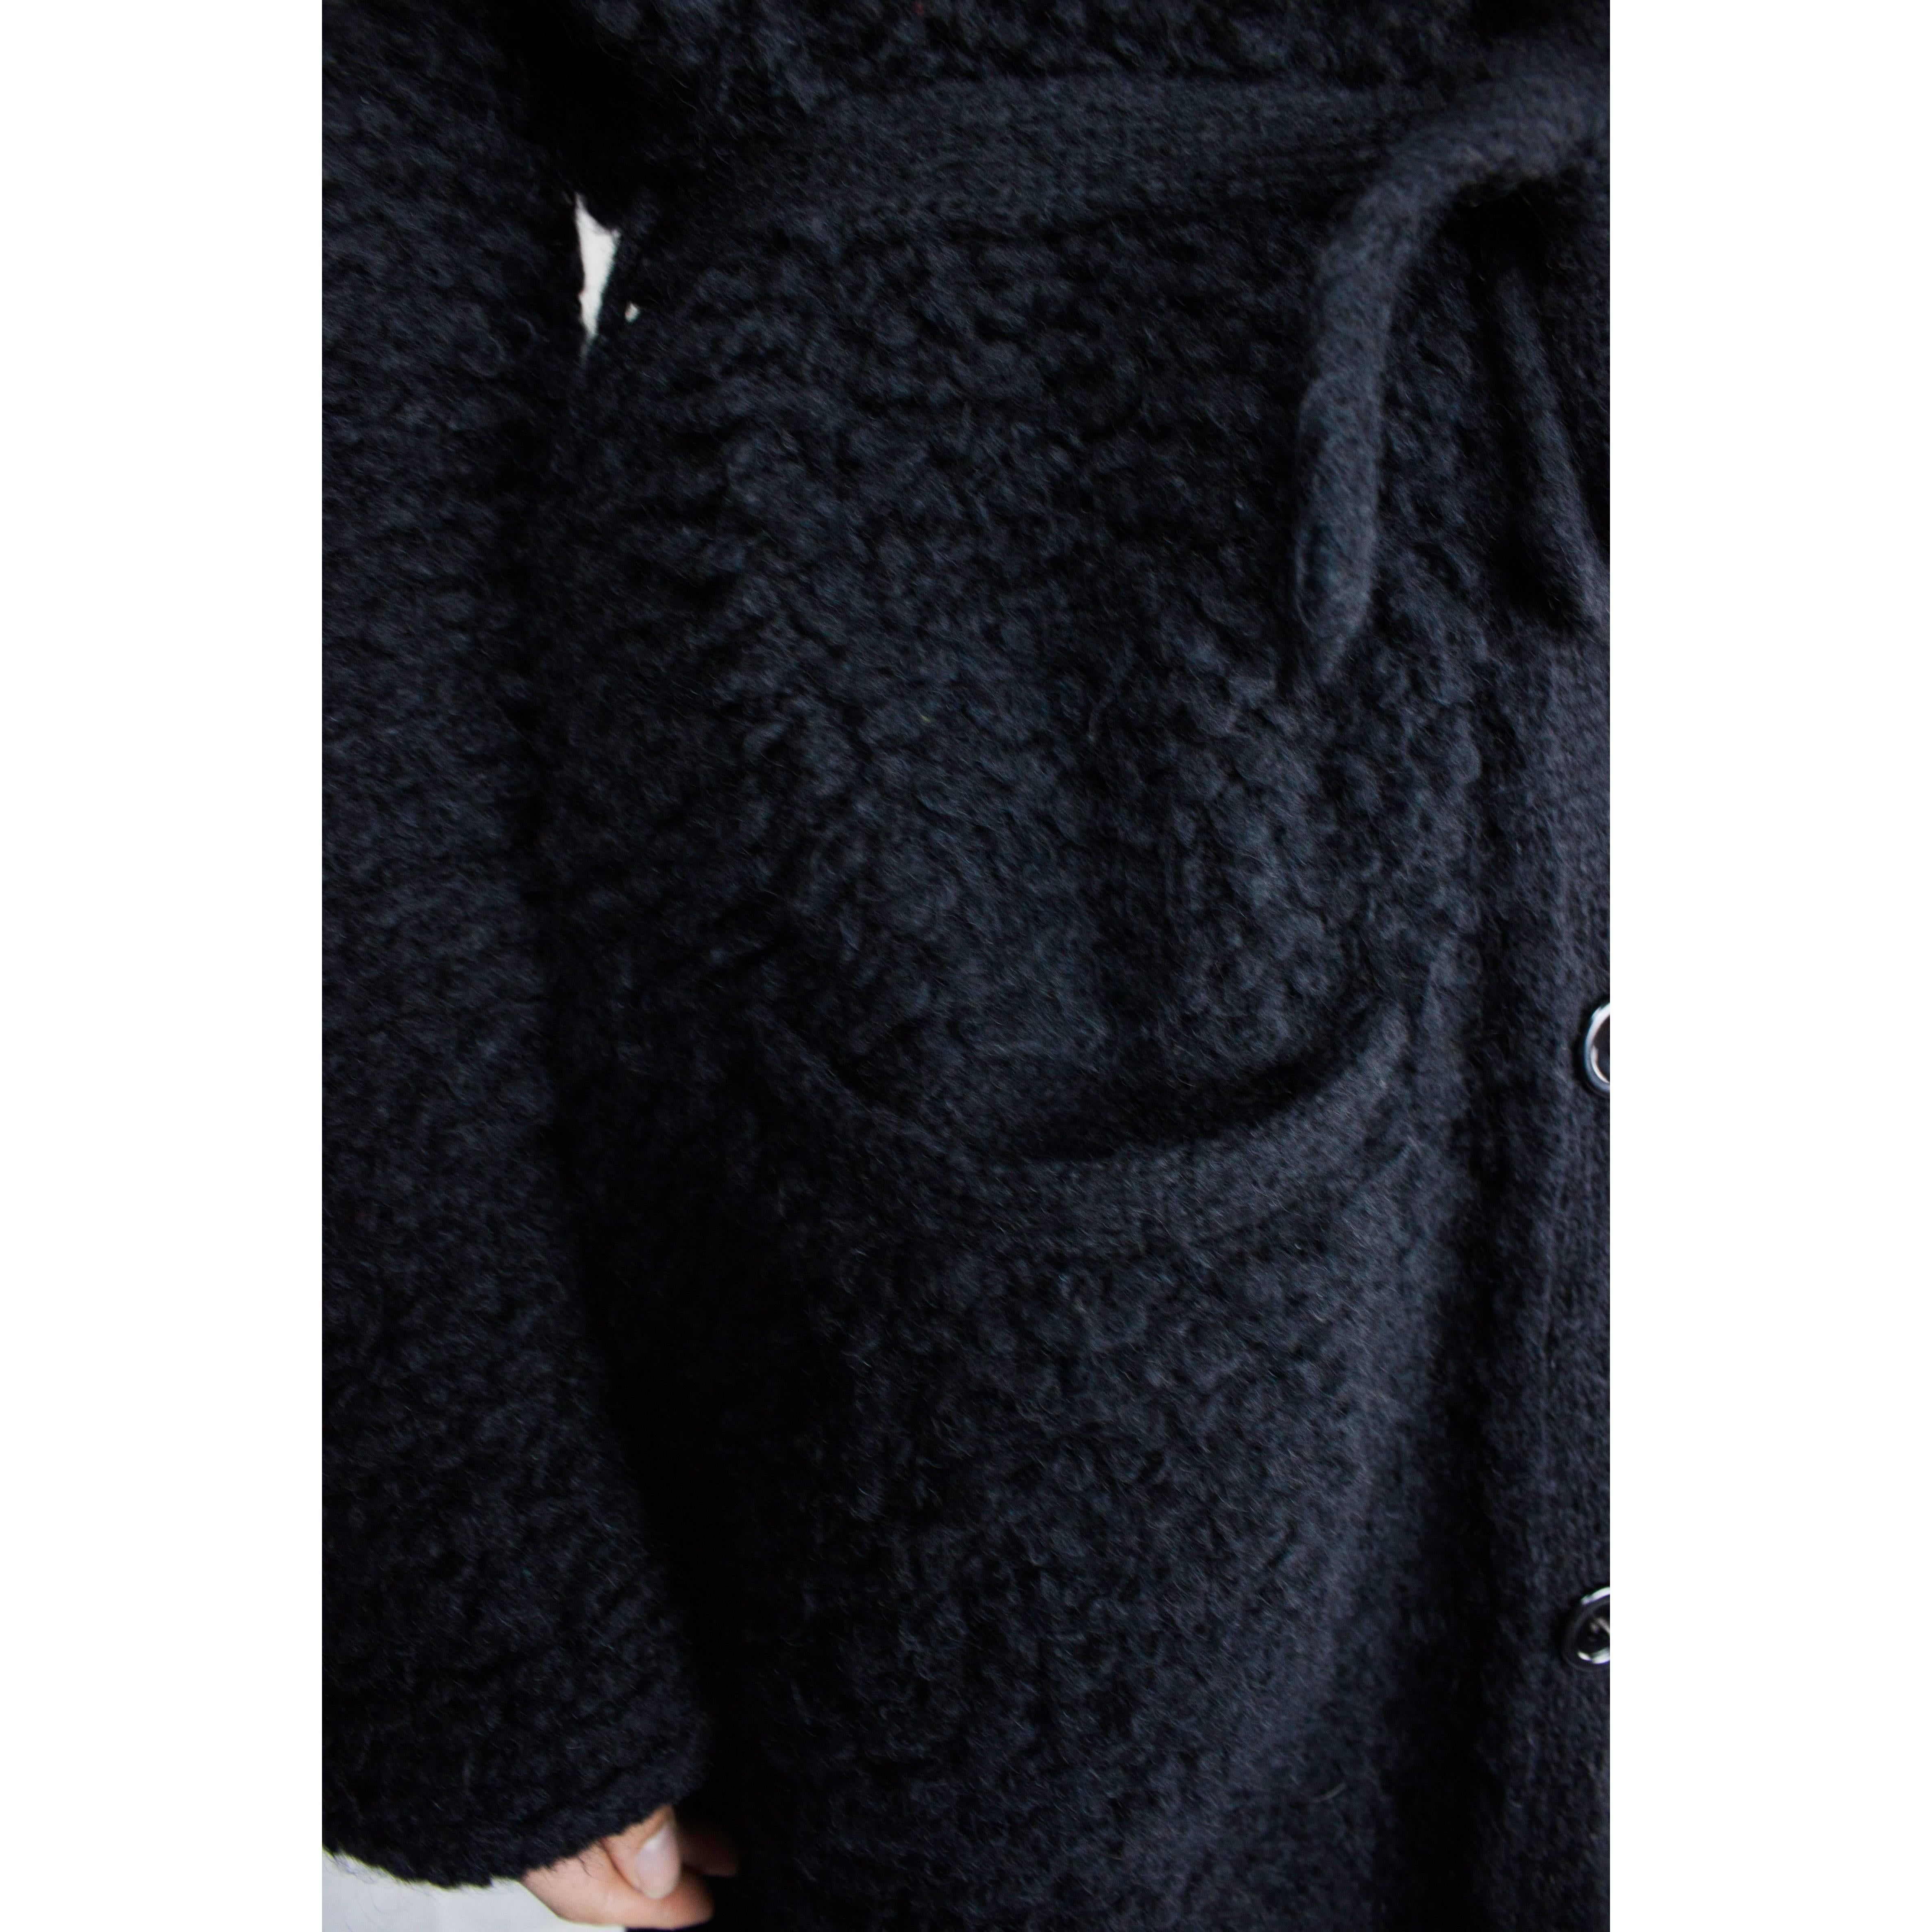  Sonia Rykiel  quintessentially French black knitted wool coat, circa 1960s For Sale 2